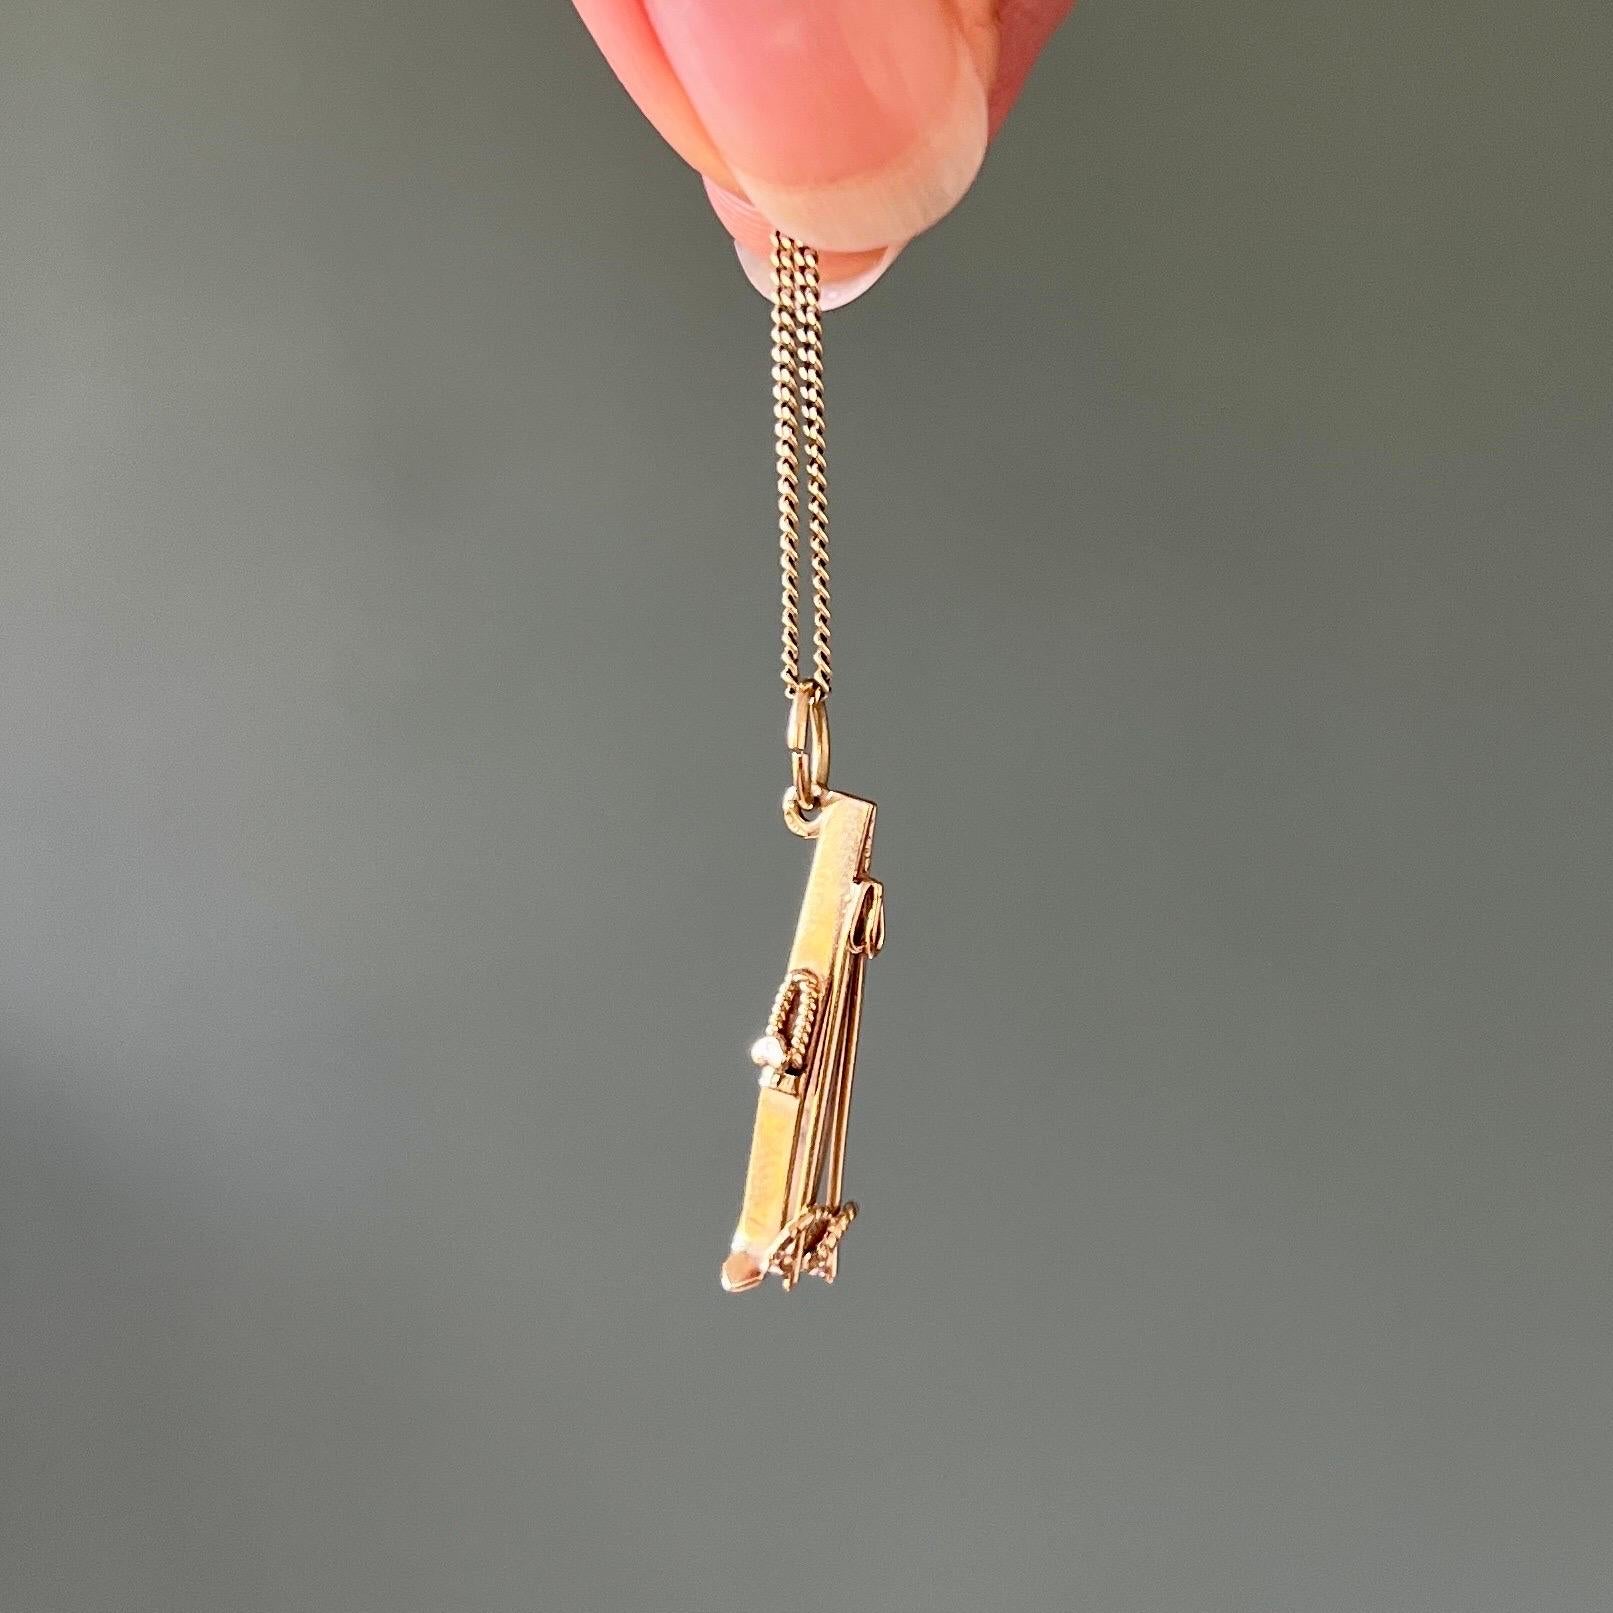 A lovely vintage 1970s 14 karat gold skis and poles charm pendant. The design of these skis are beautiful, including lots of great details like the accentuated hearts on the boot-bindings and ski poles. Ready to hit the slopes! The charm comes